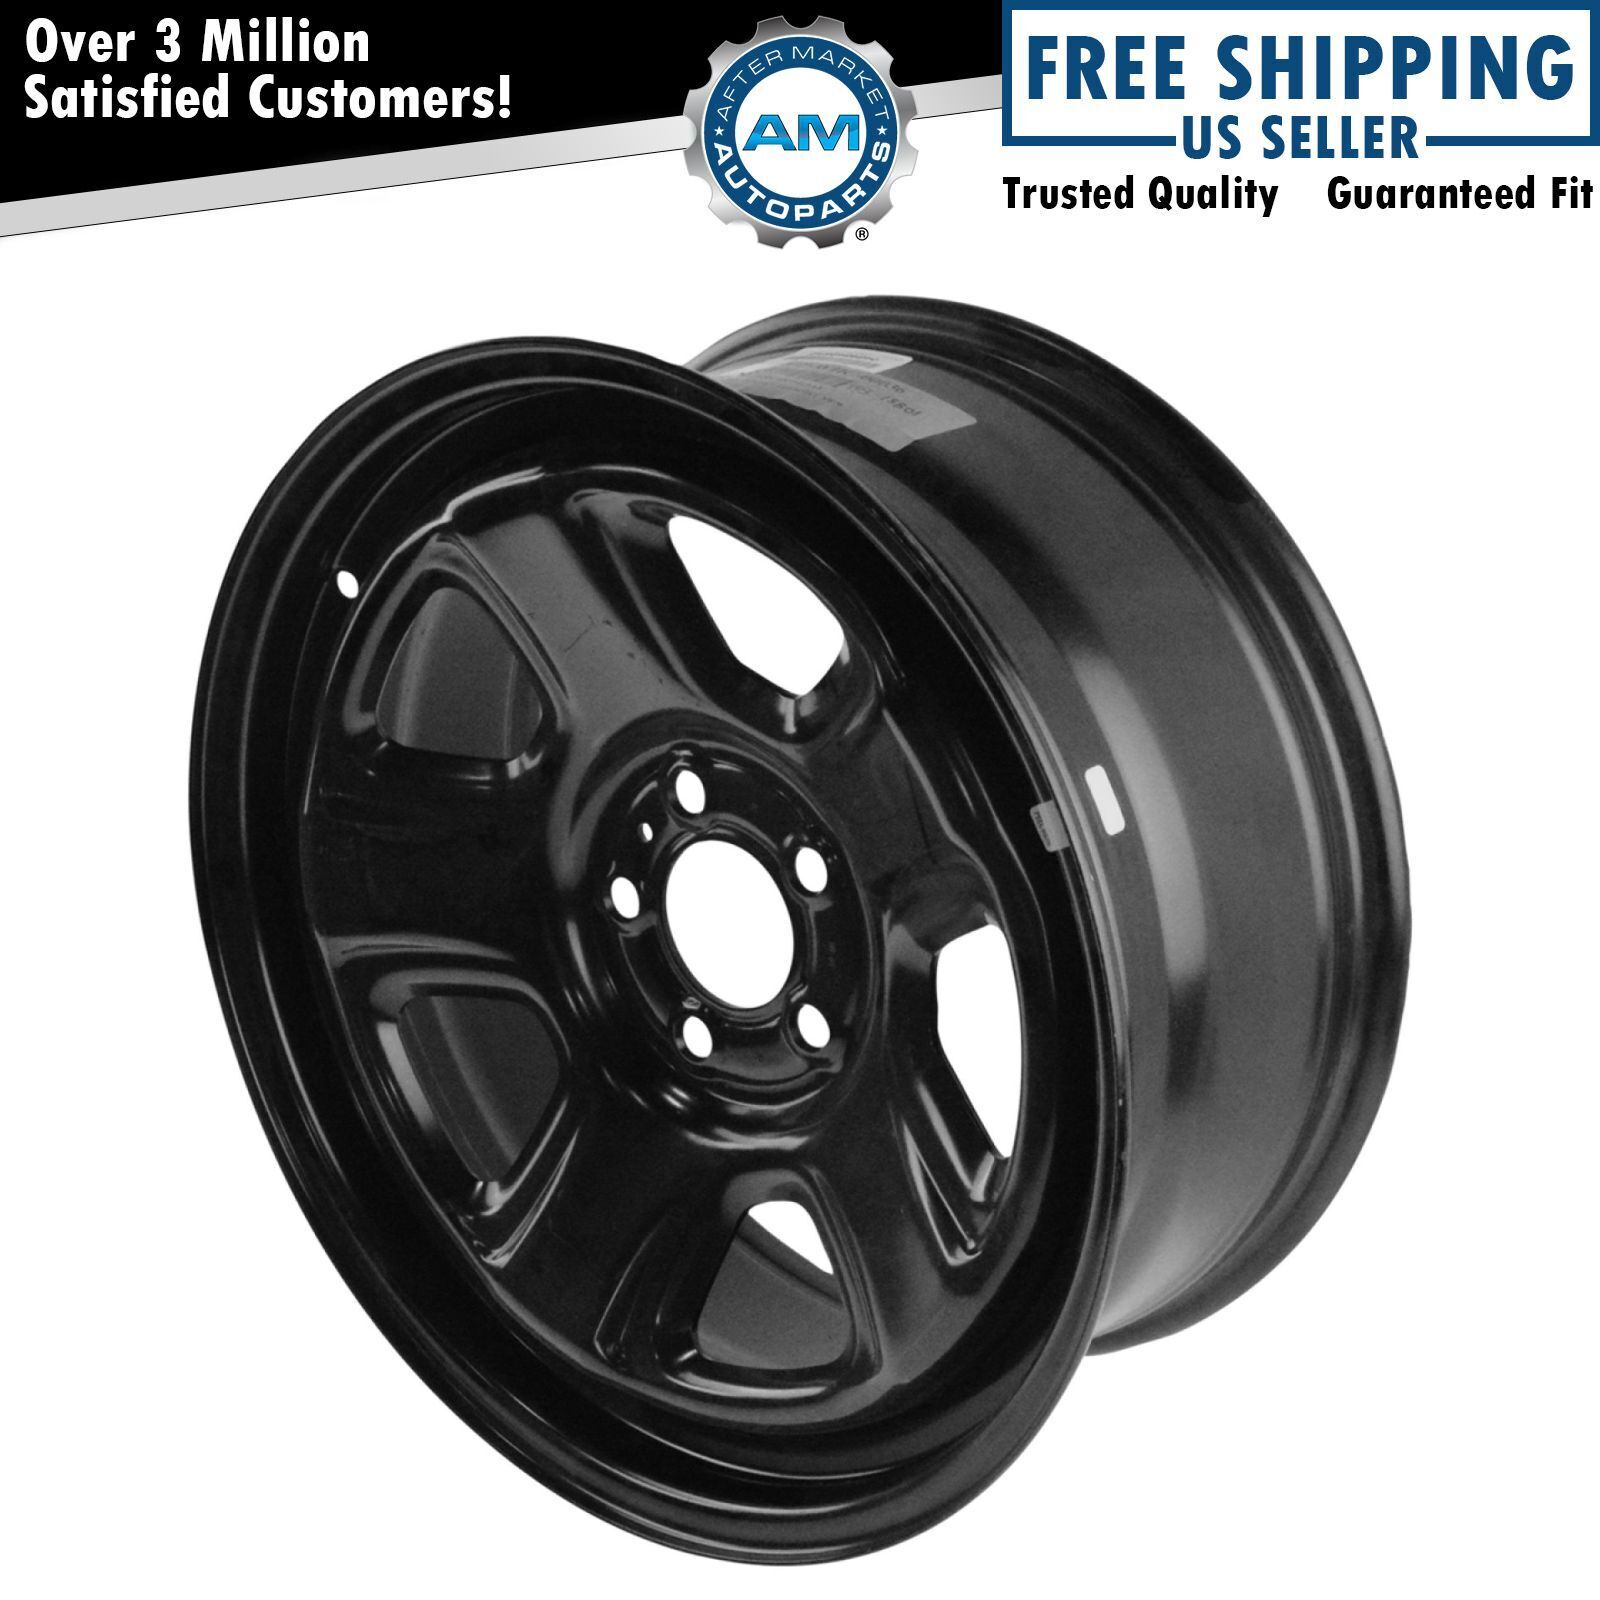 OEM 18 x 7.5 Steel Wheel Black for Charger Magnum Challenger Police Package New